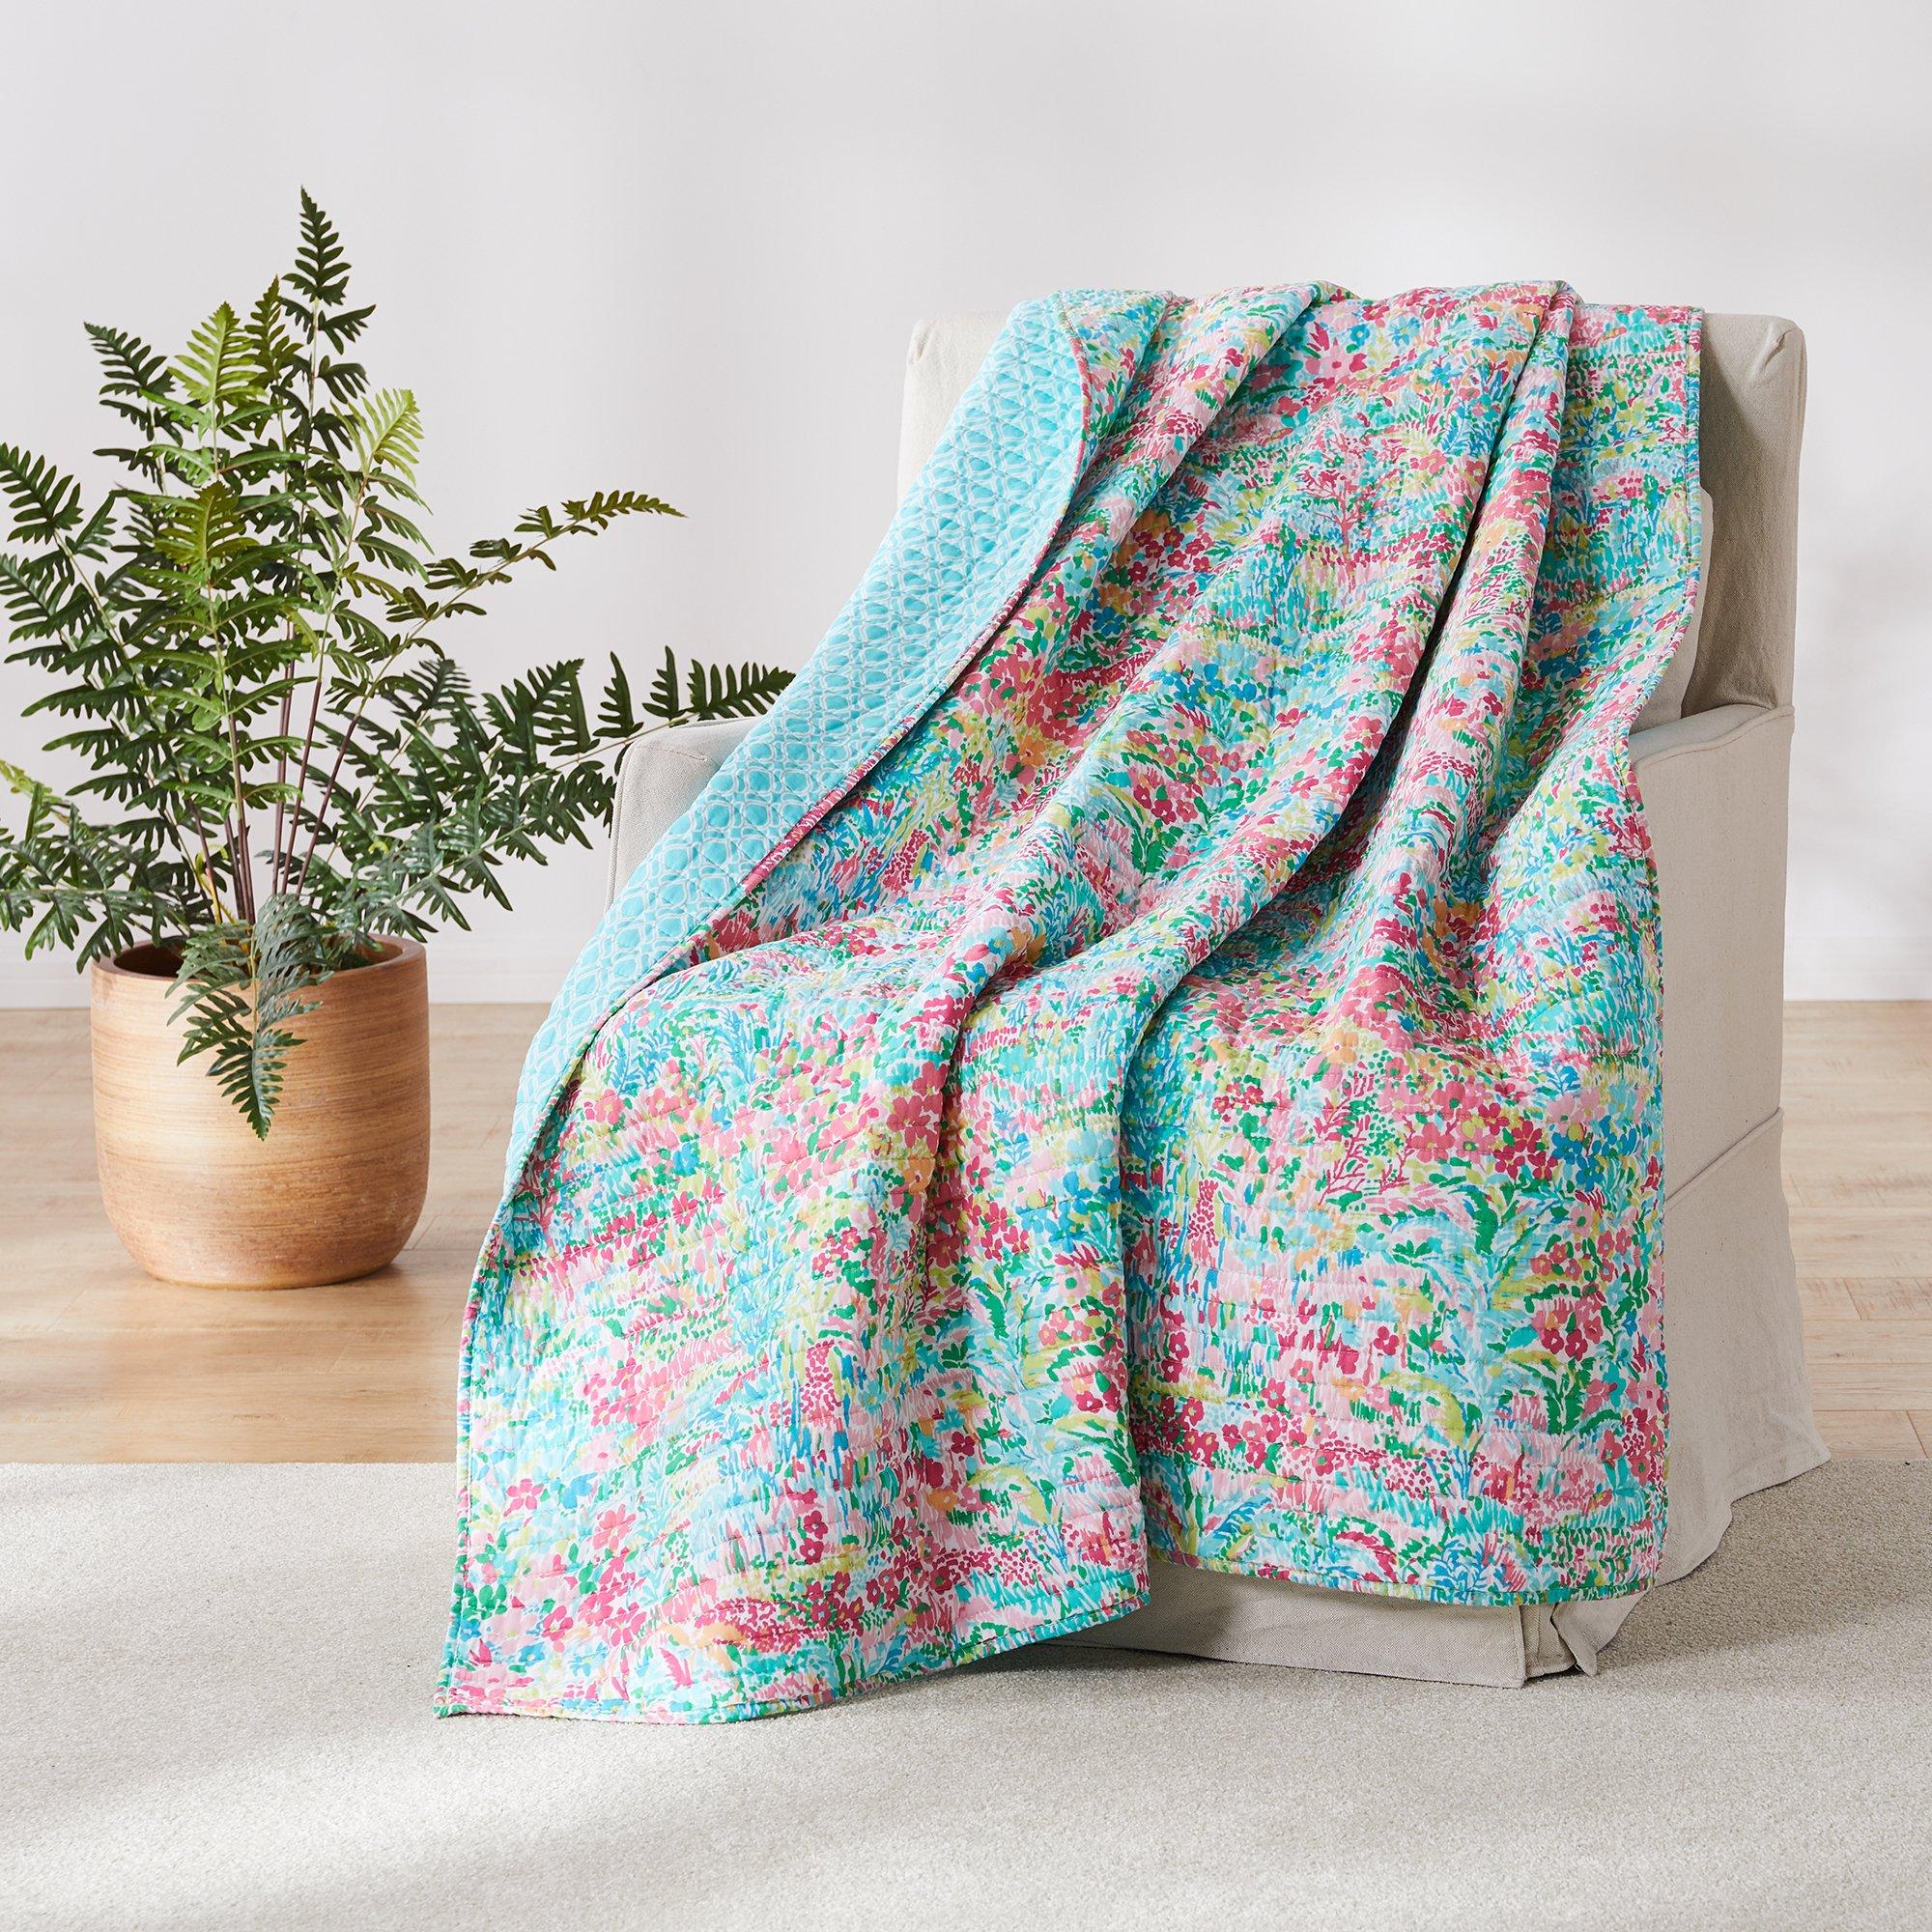 Levtex Home Karola Ditsy Floral Quilted Throw